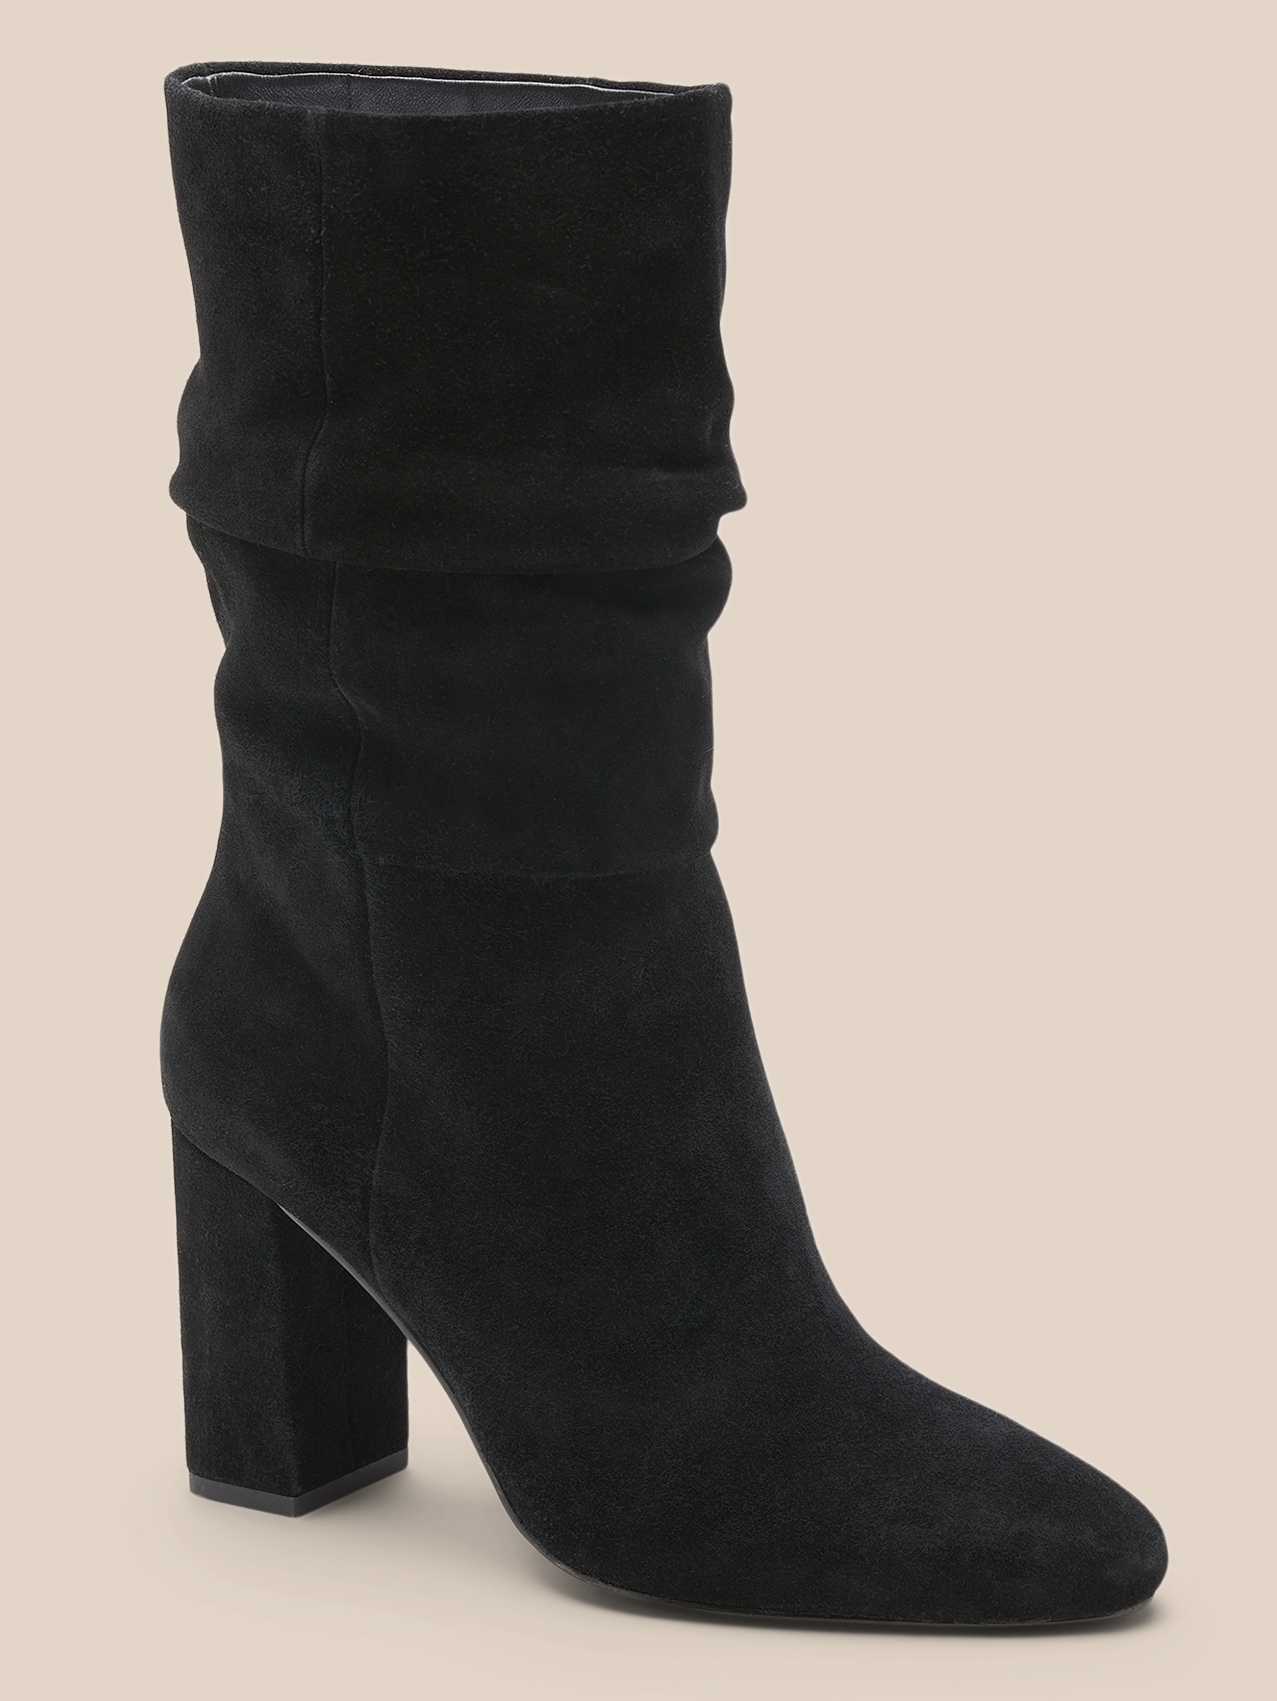 Midshaft Suede Slouchy Womens Boot